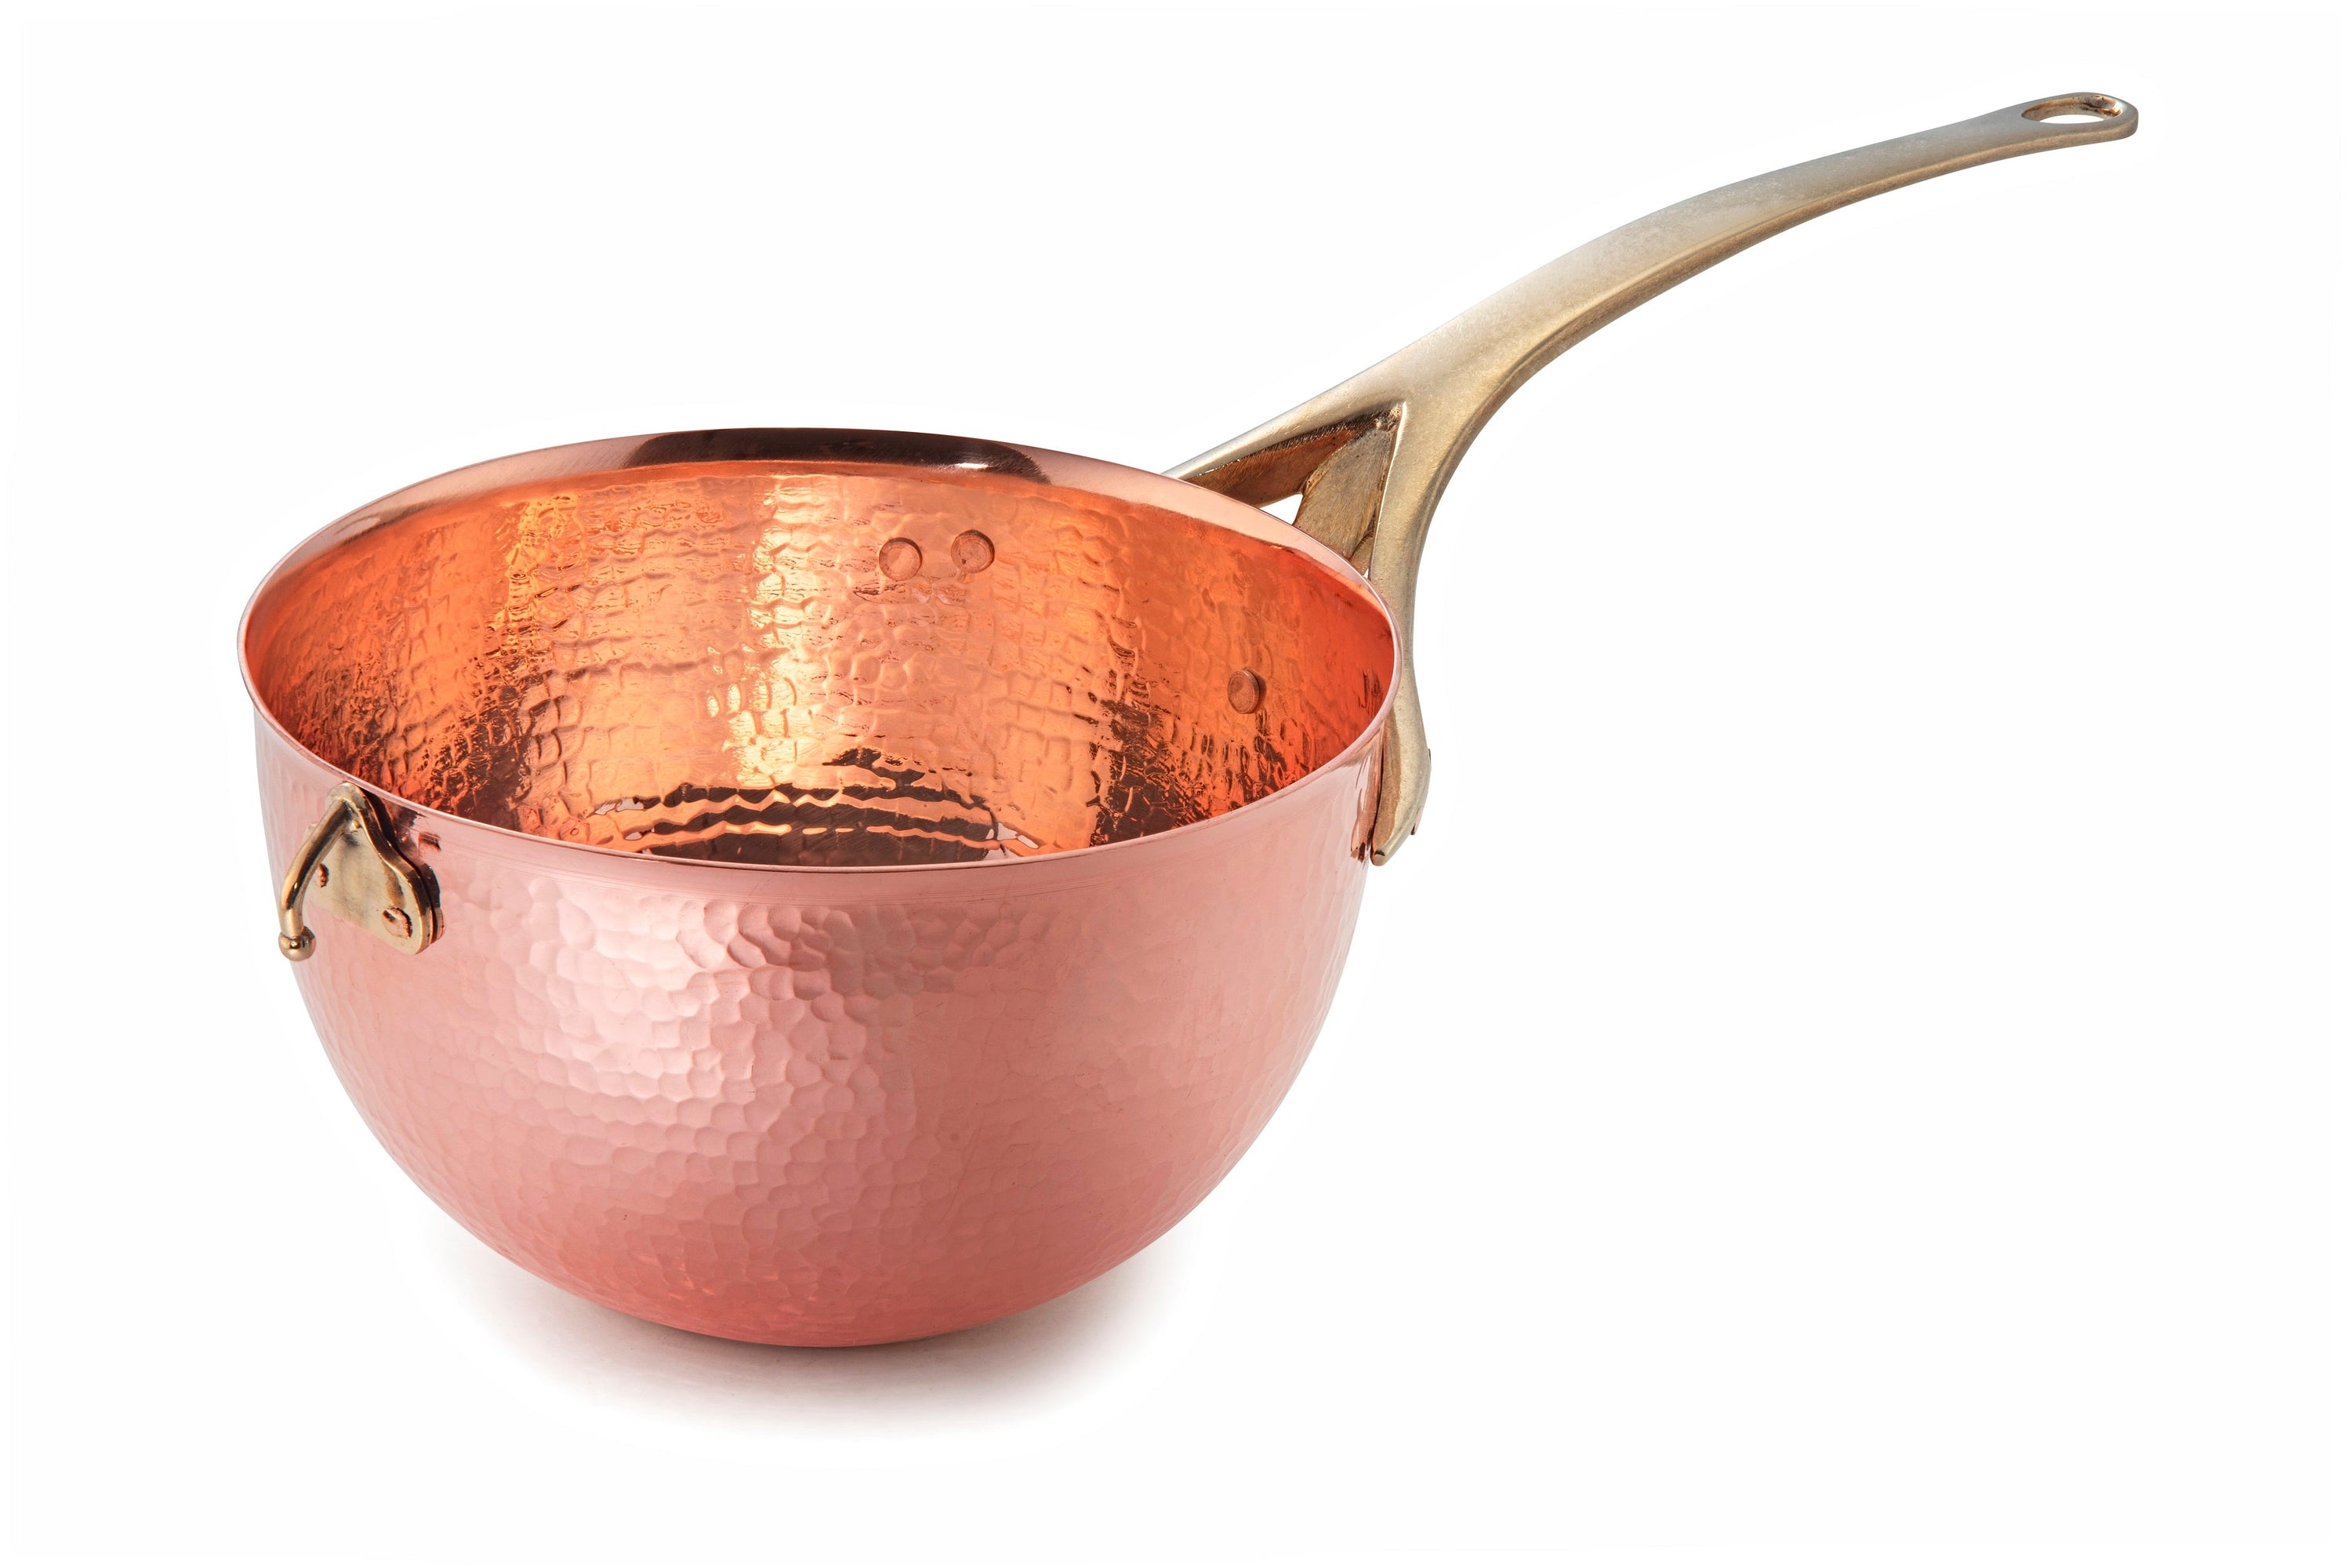 #copper #copperware #solidcopper #handmade #cookware #pro #proffesional #handmade #procookware #soy #soycopperware #luxury #premium #cooking #chef # #pan #cookingpan #kitchen #hammered #pastryware #zabaglione #bainmarie